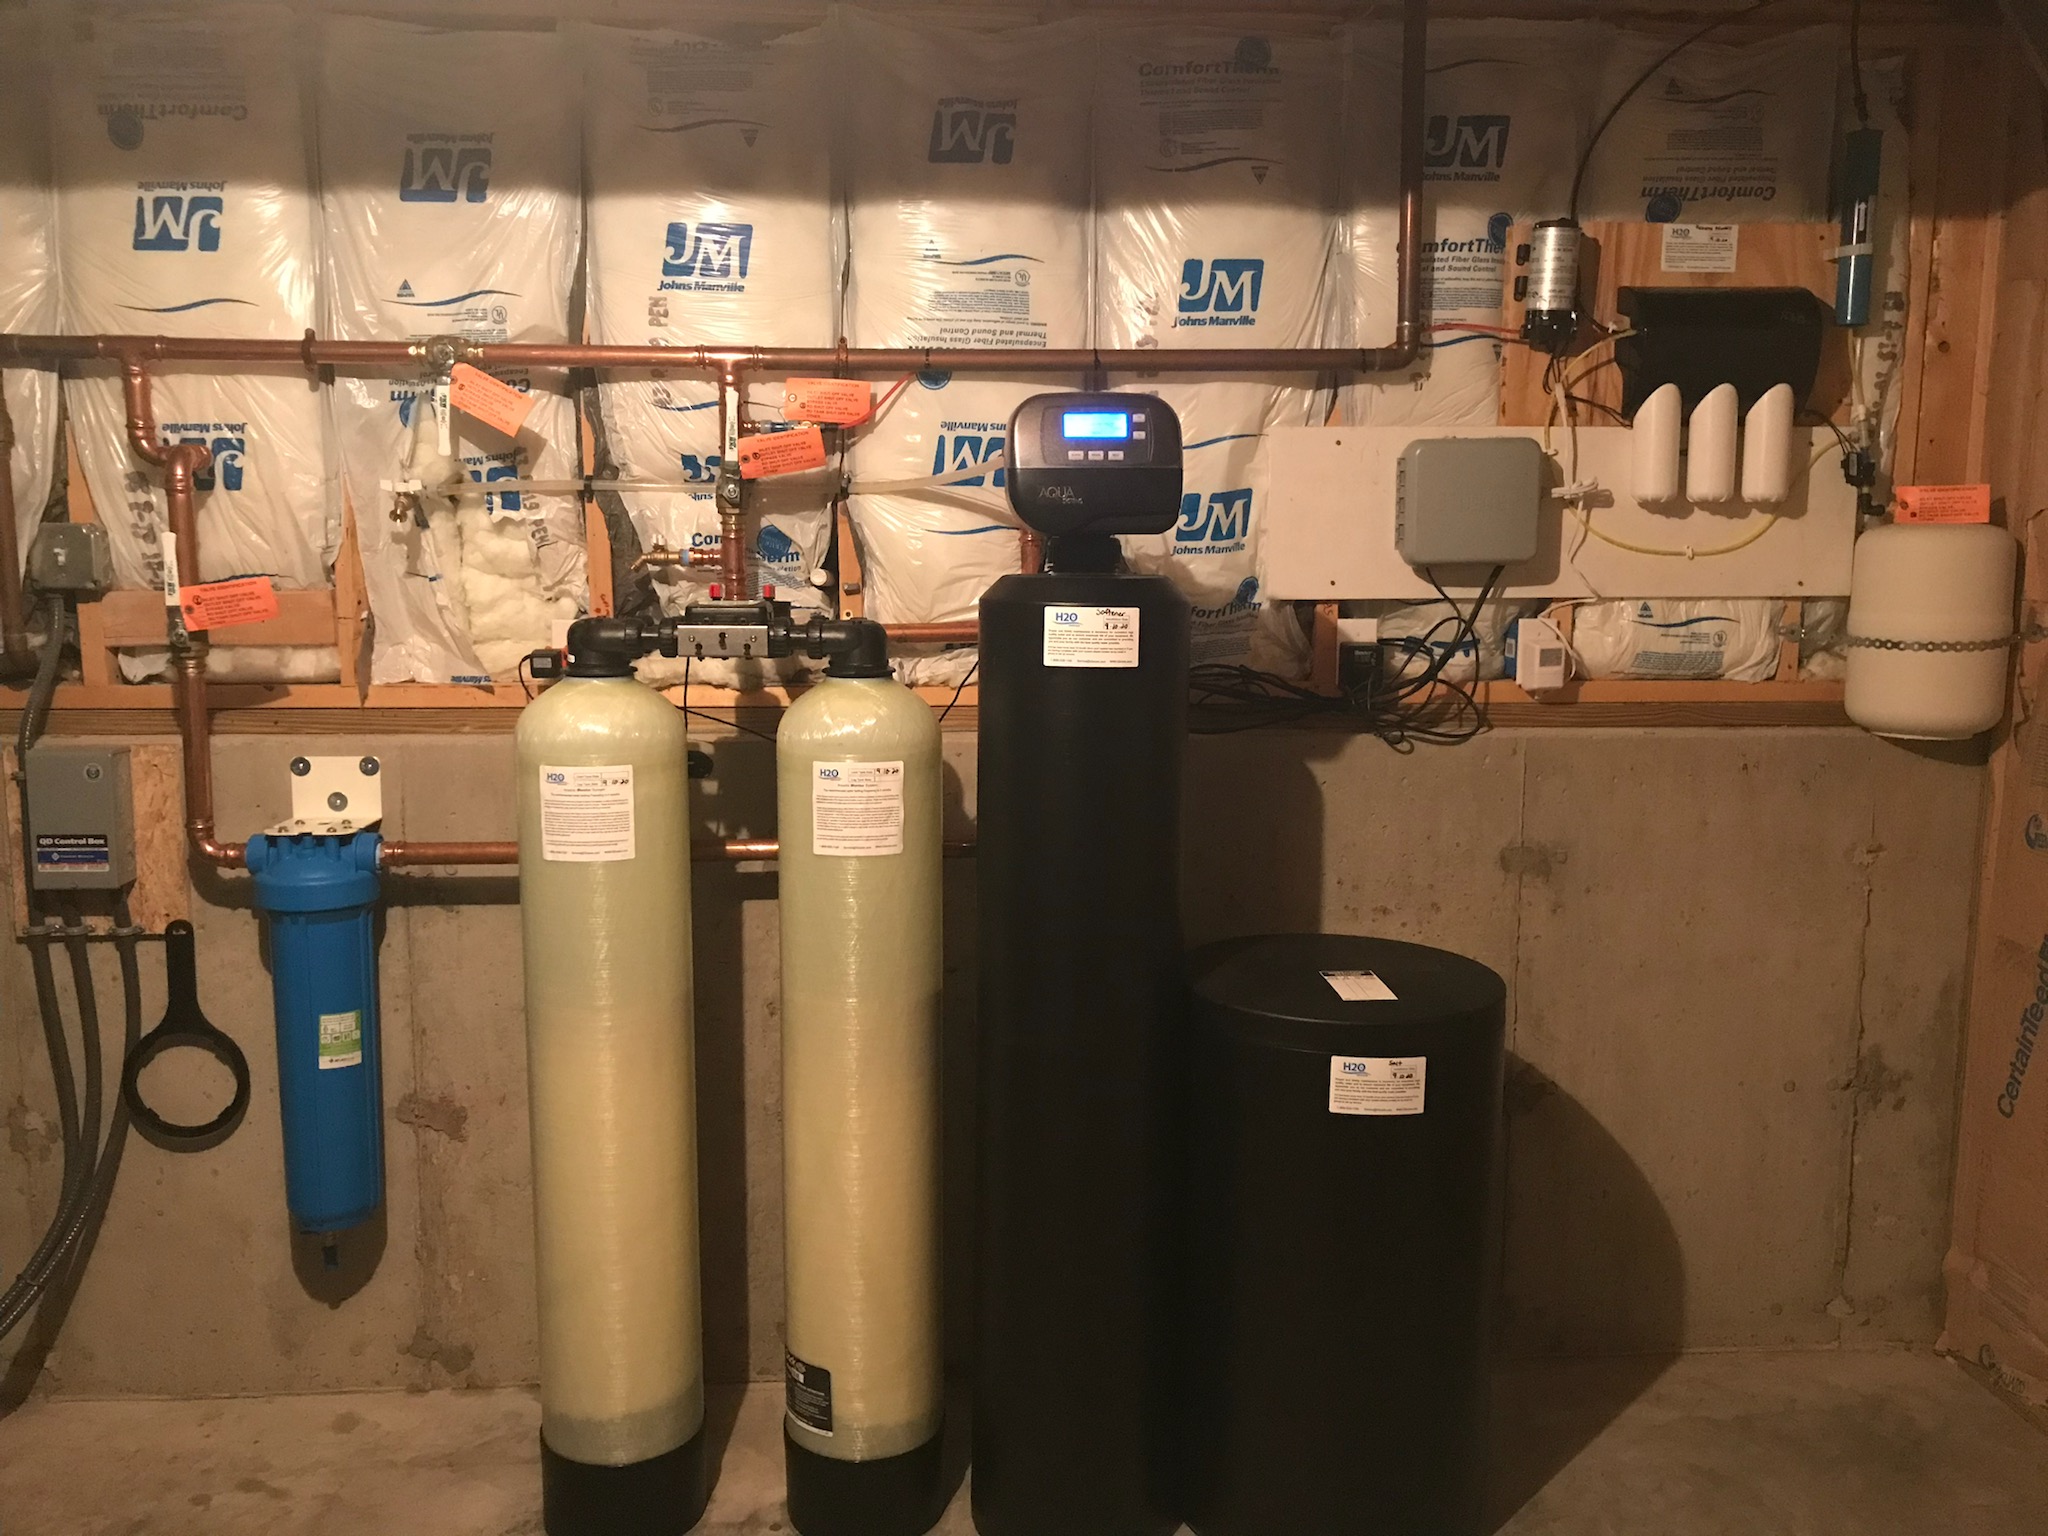 Twin (redundant) arsenic removal system with test ports and high efficiency 1 1/2 cubic feet Water Softener with 'big blue" graded density 5-micron sediment filter as well as a reverse osmosis purification system (on wall with 3 white housings with white storage tank) feeding a separate faucet upstairs at the kitchen sink.